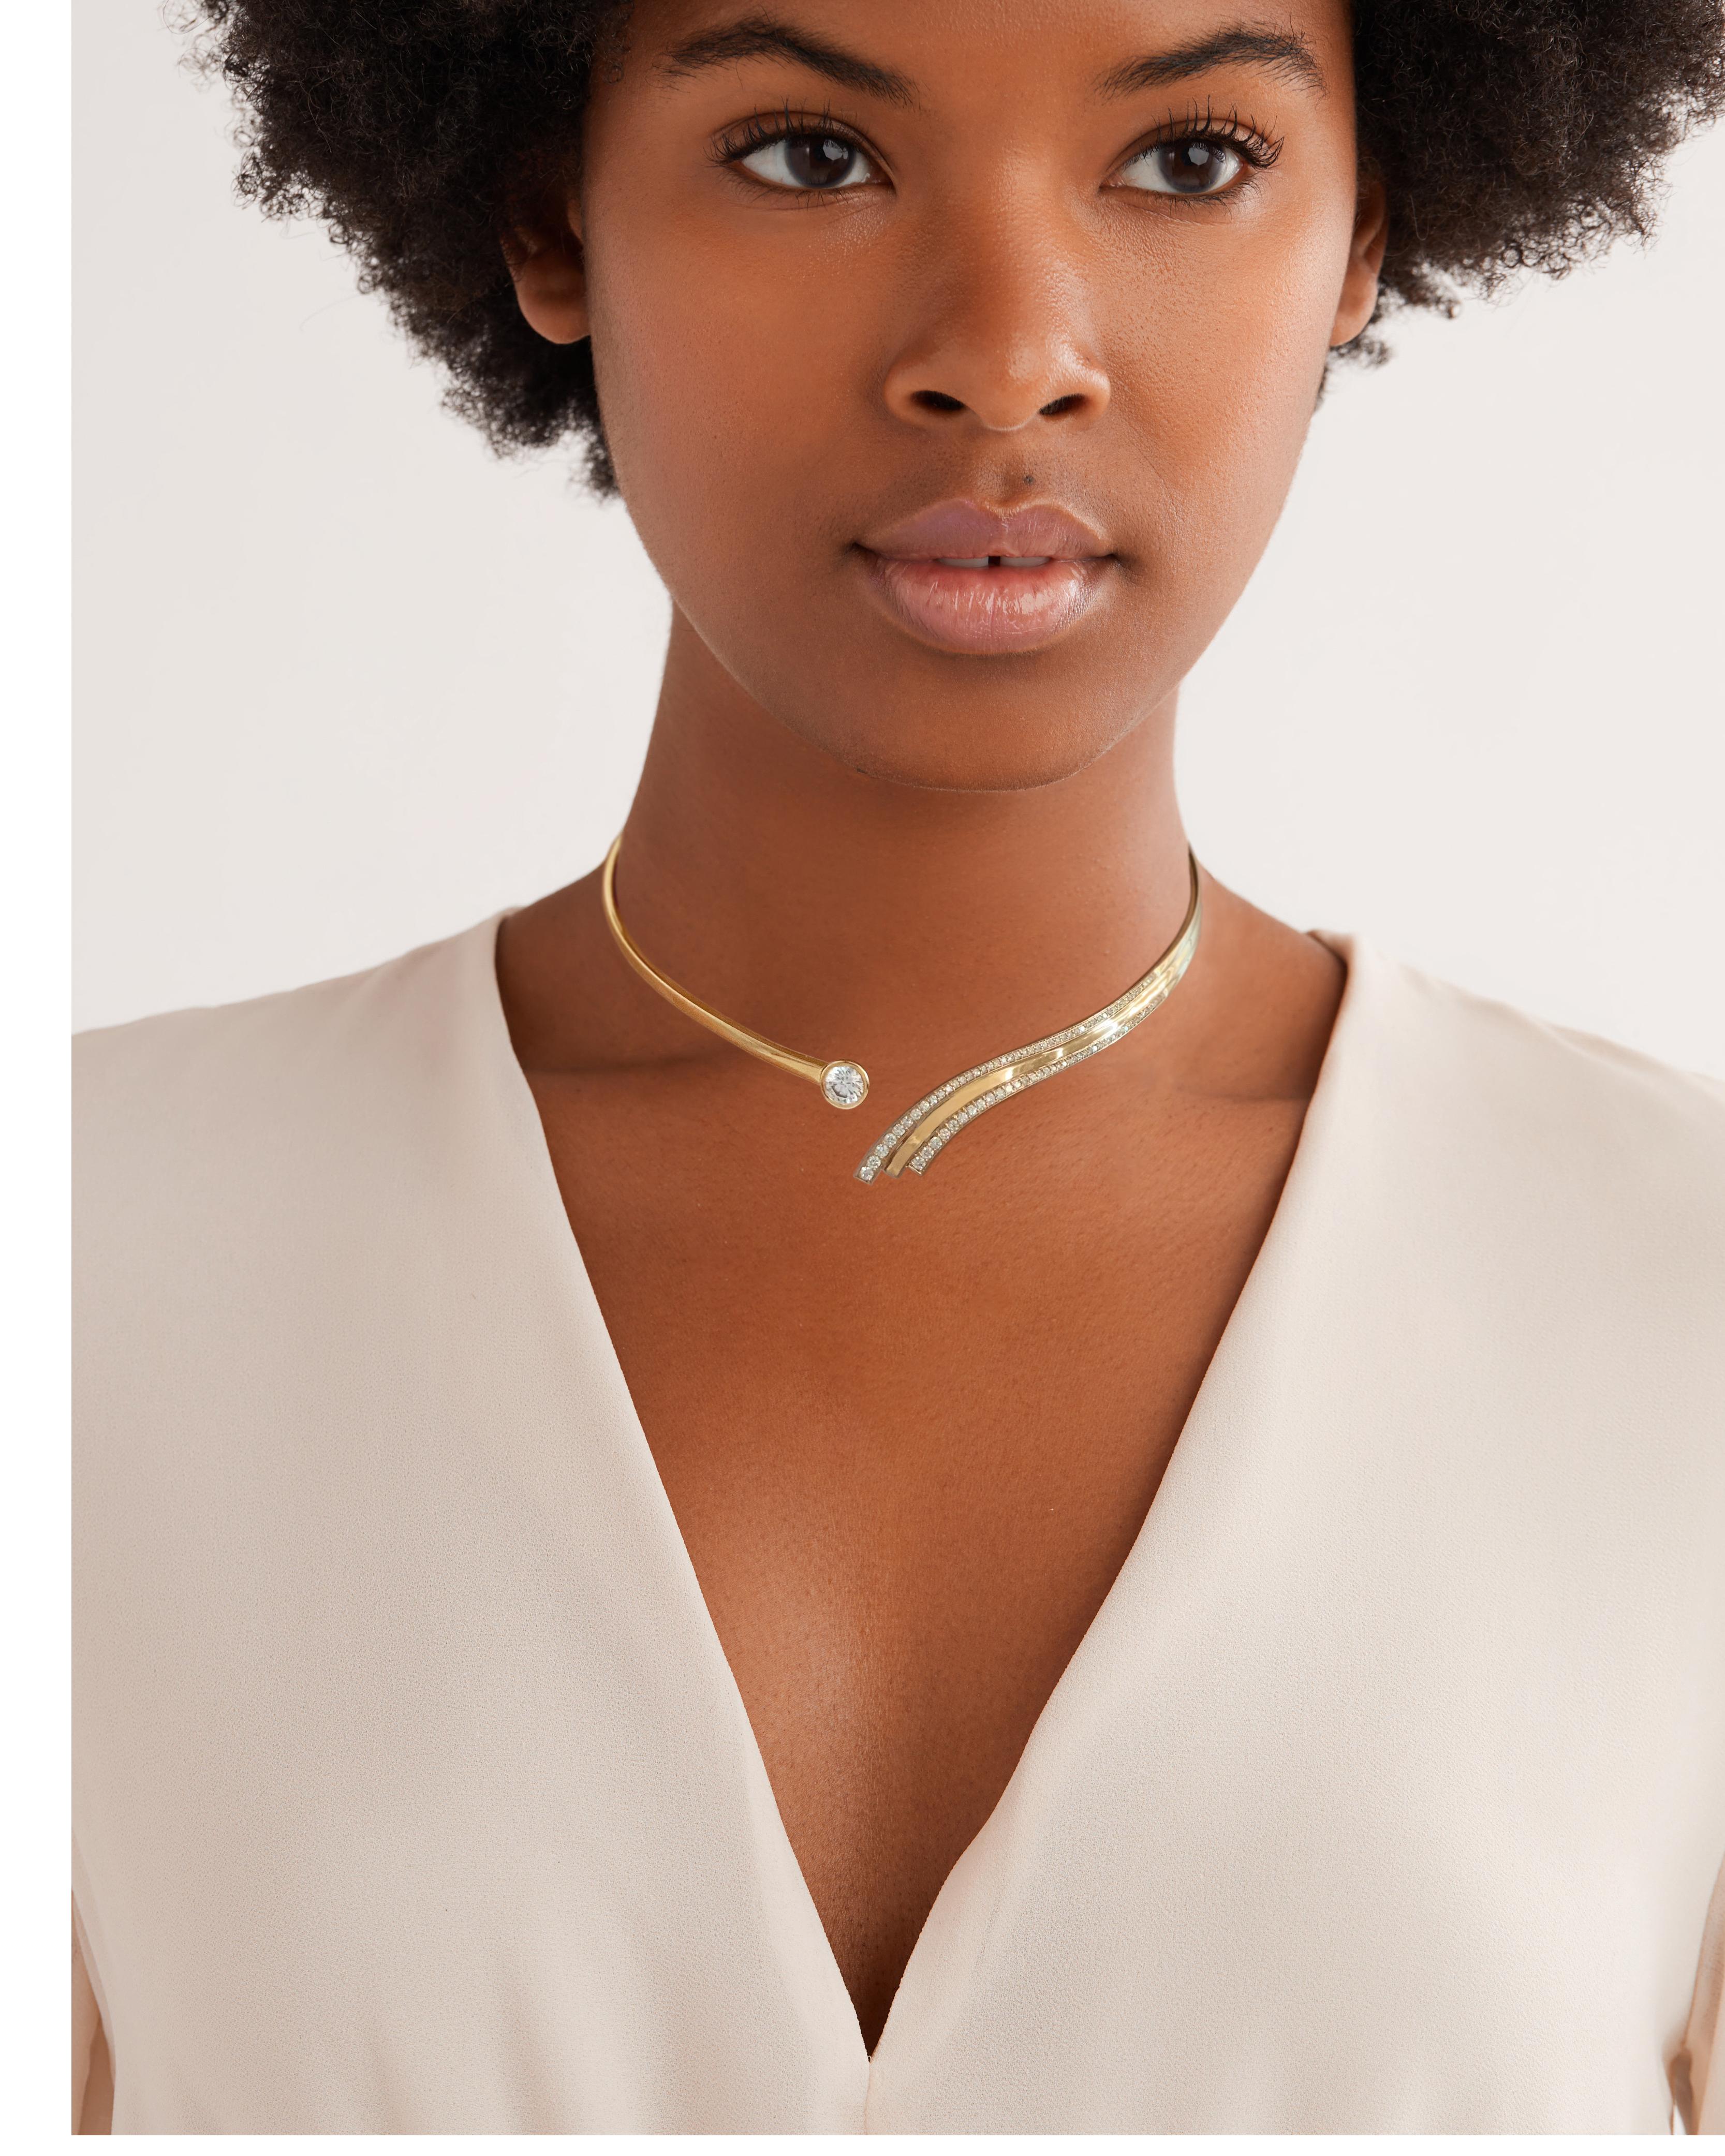 A stunning 18K yellow gold choker with curving, diamond pave wave detail. The choker is set with a 1.25 ct brilliant cut round diamond. The choker features a slim hinge at the back for a beautiful fluid look. 
-Sits at the collarbone
-Inner Diameter